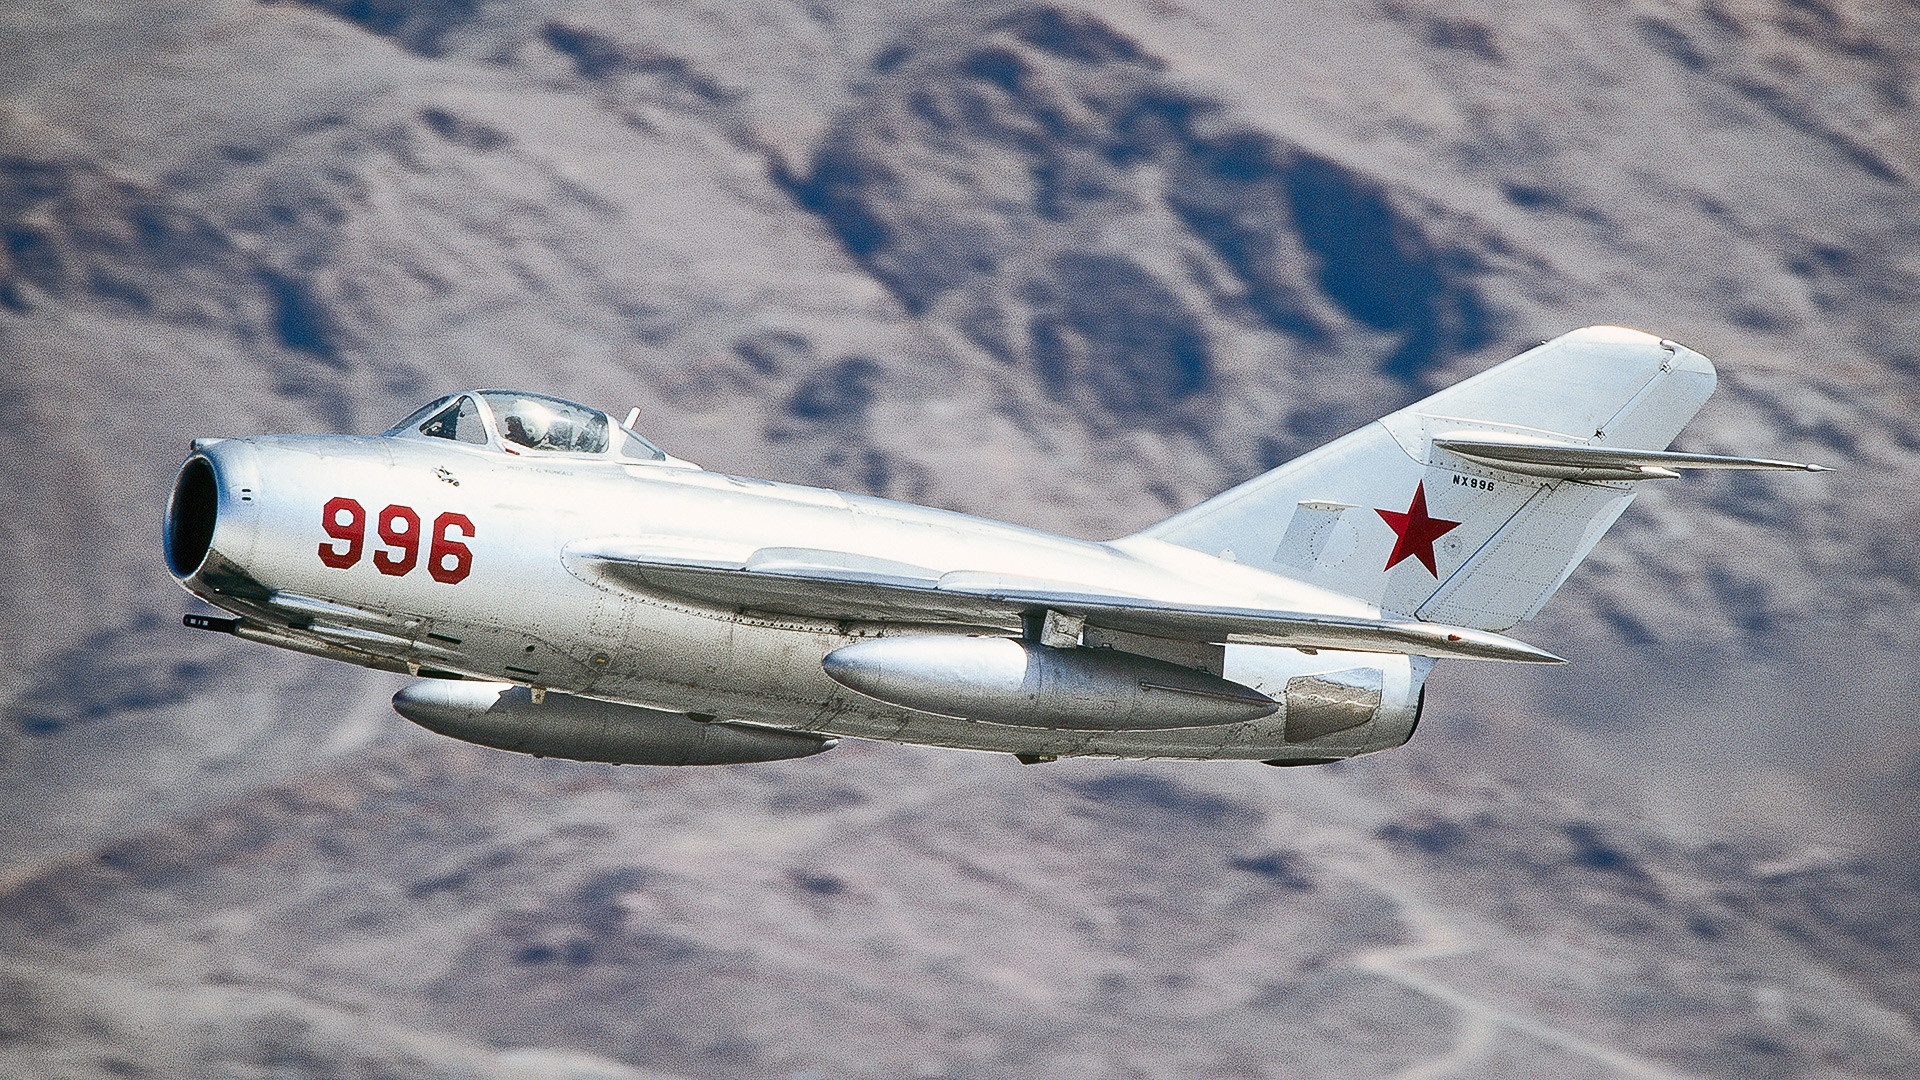 The MiG-15 is the most prolific jet fighter ever produced 